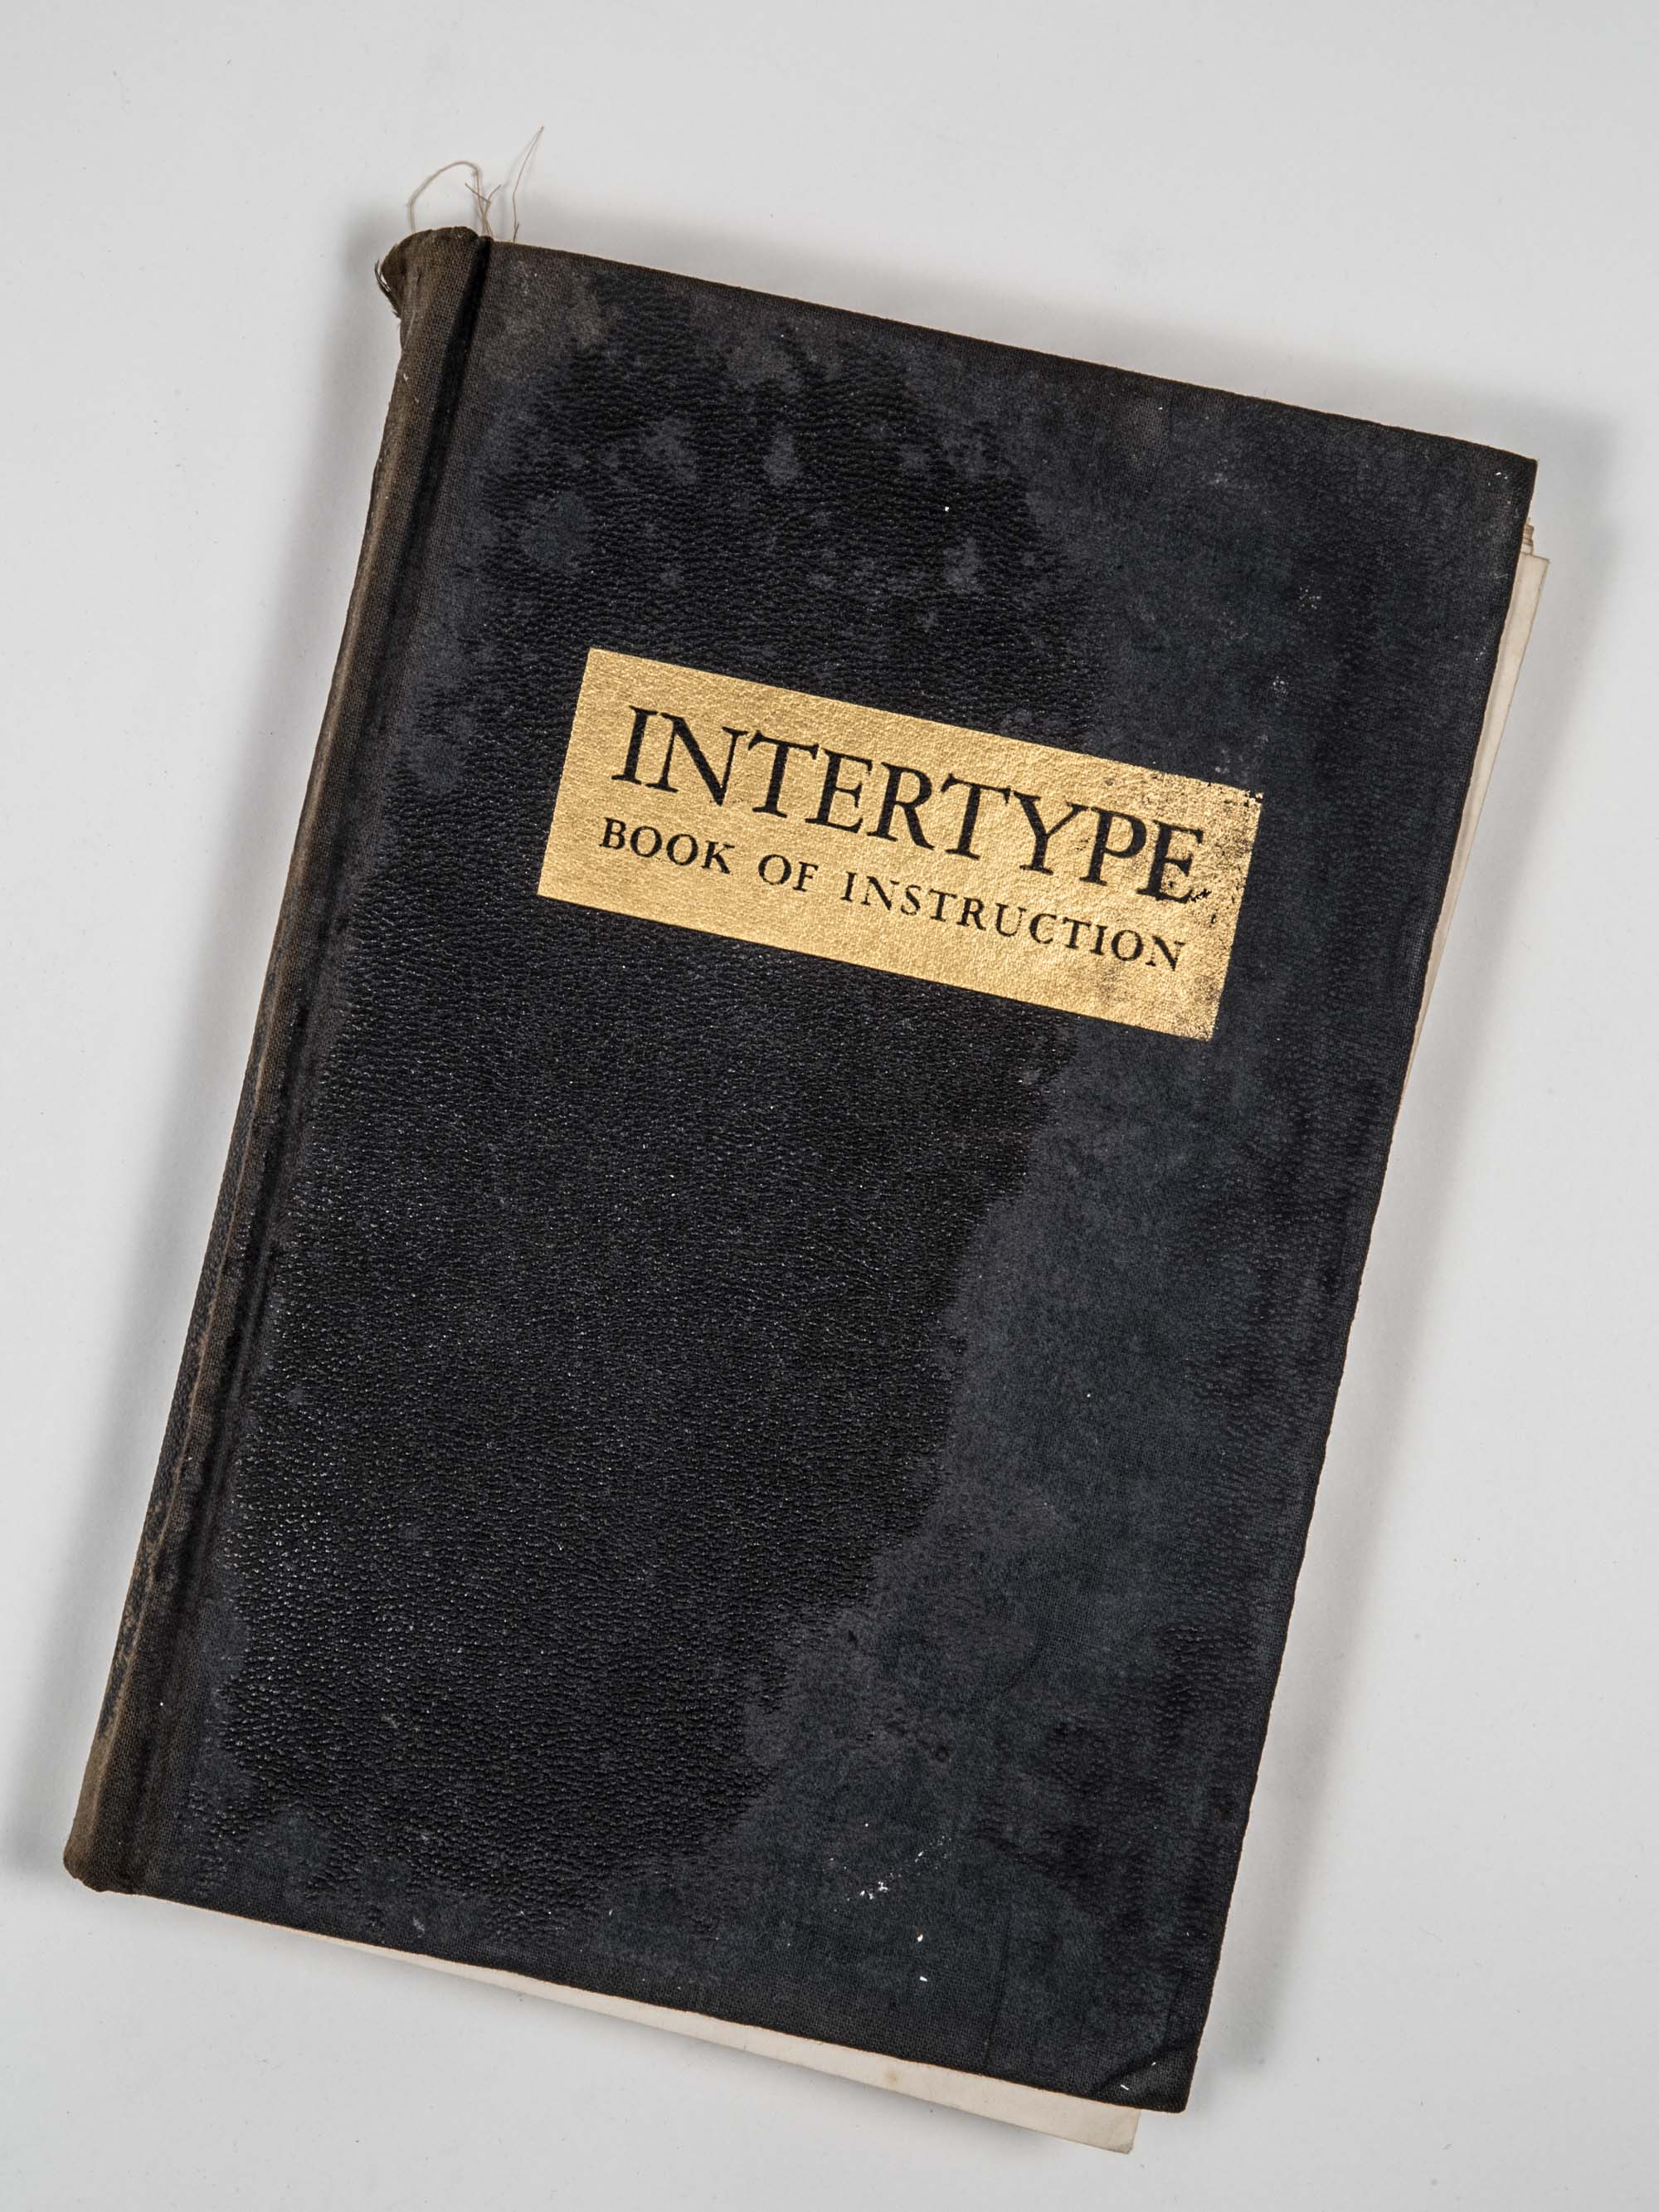 The front cover of the Intertype Book of Instruction